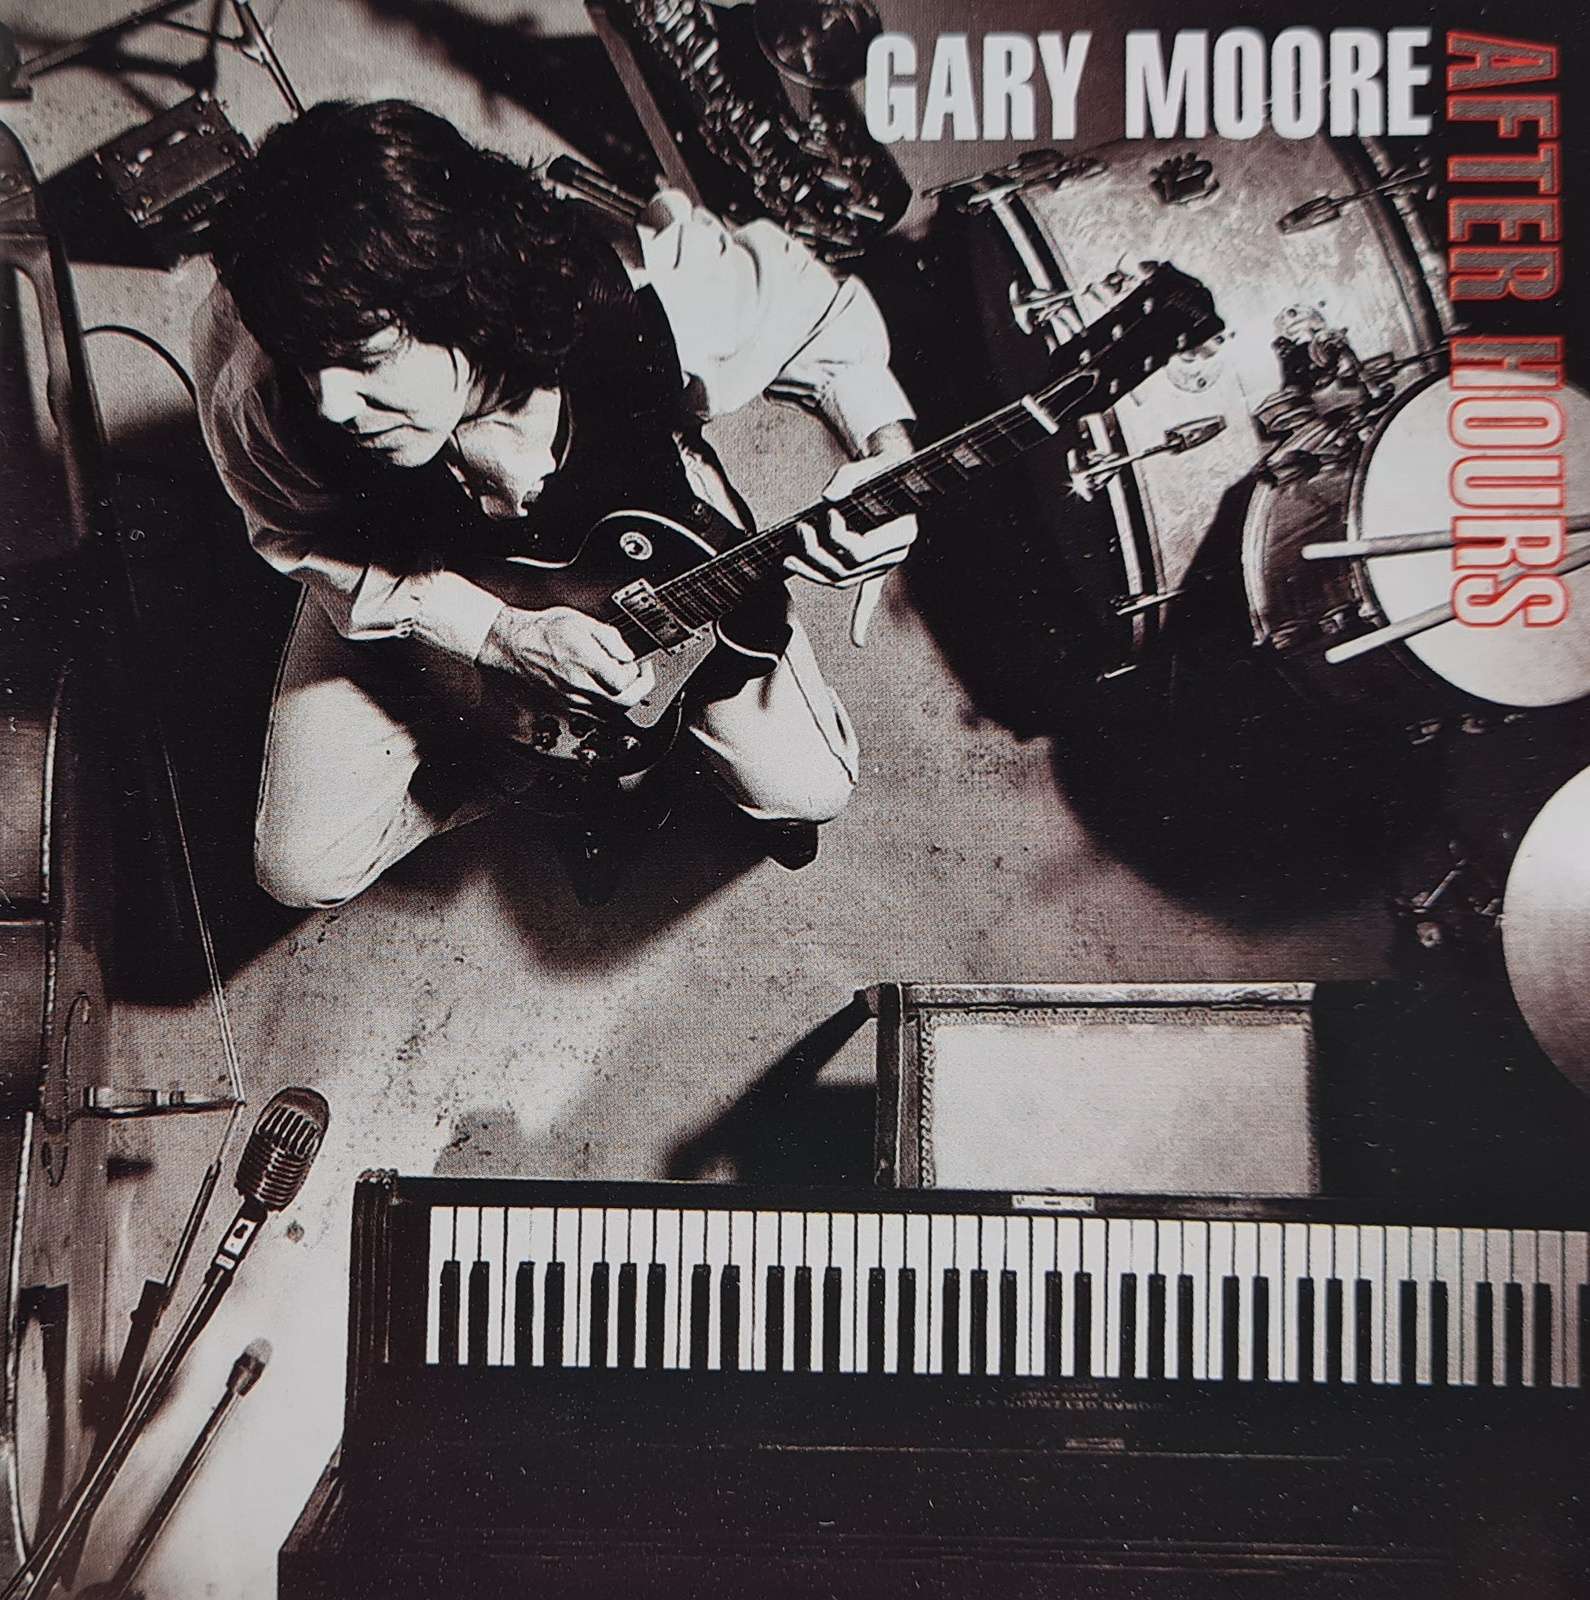 Gary Moore - After Hours (CD)